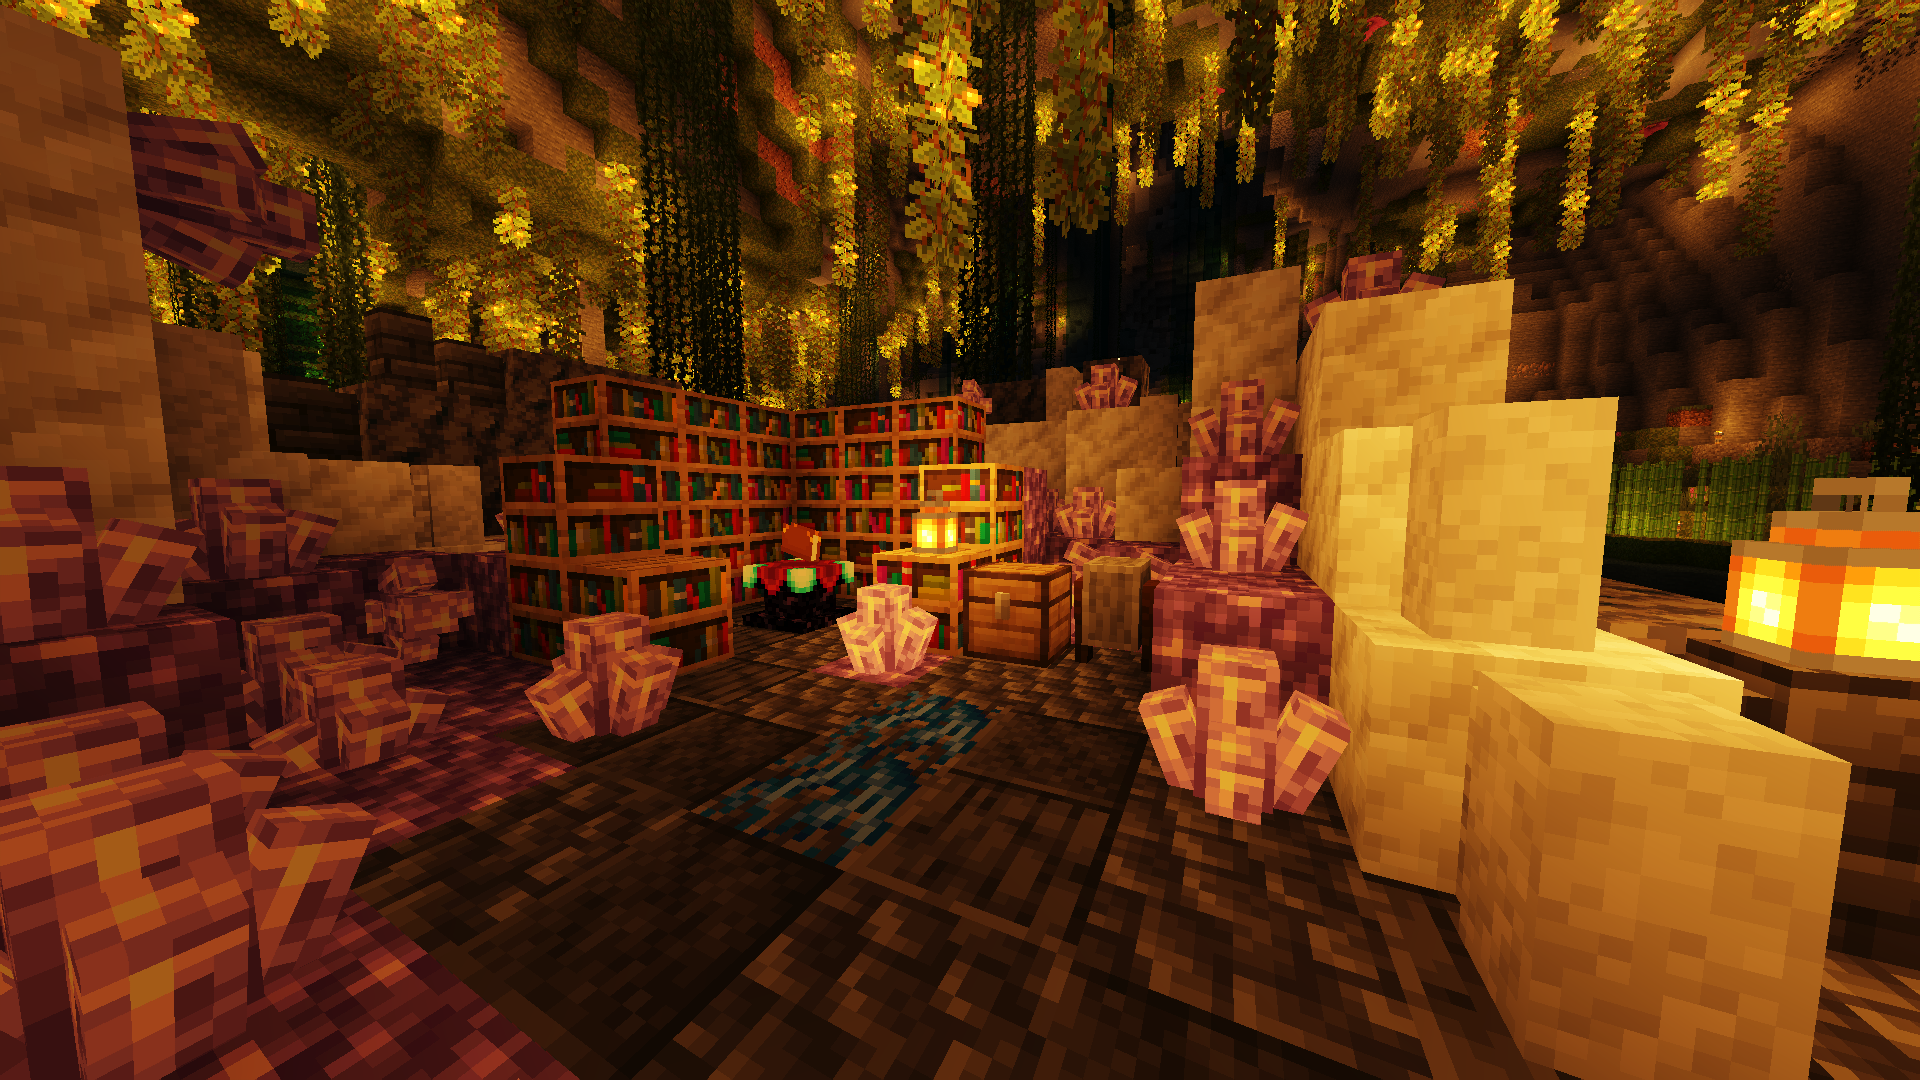 A screenshot of the game Minecraft. The screenshot shows an enchanting station situated in a chunk of a huge amethyst geode. The black outer shell and white inner layer of the geode have been formed into a platform and wall, with chunks of amethyst remaining. On the same platform are a chest and grindstone. The platform is floating on water inside a cave, everything bathed in warm light from nearby lanterns and glow berries growing from the ceiling.